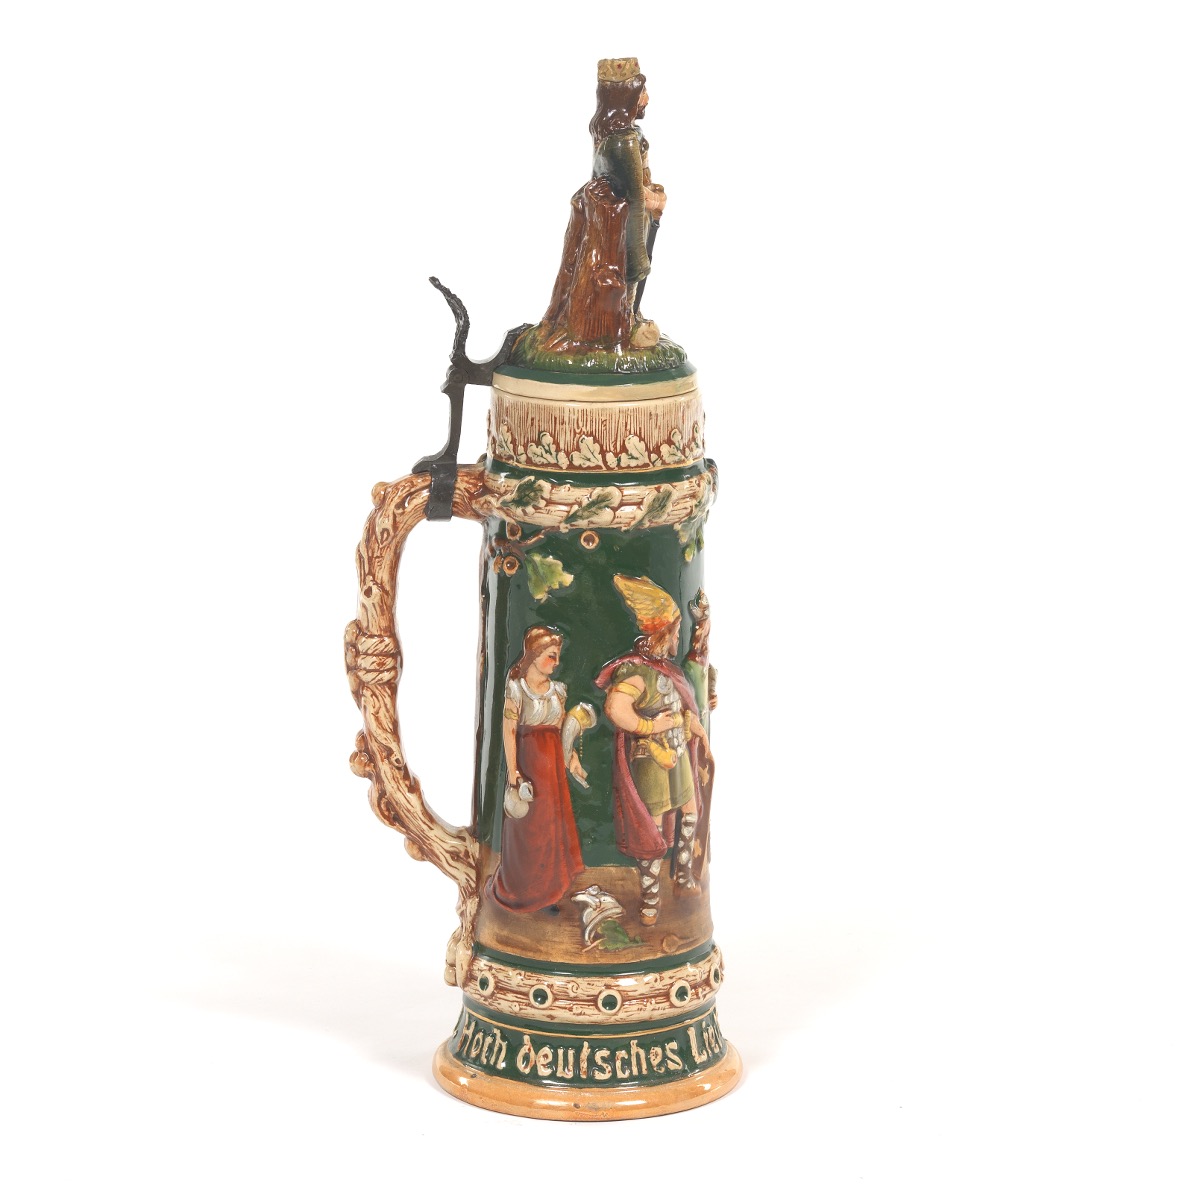 German Ceramic Stein "The Ring of the Nibelung" - Image 5 of 10